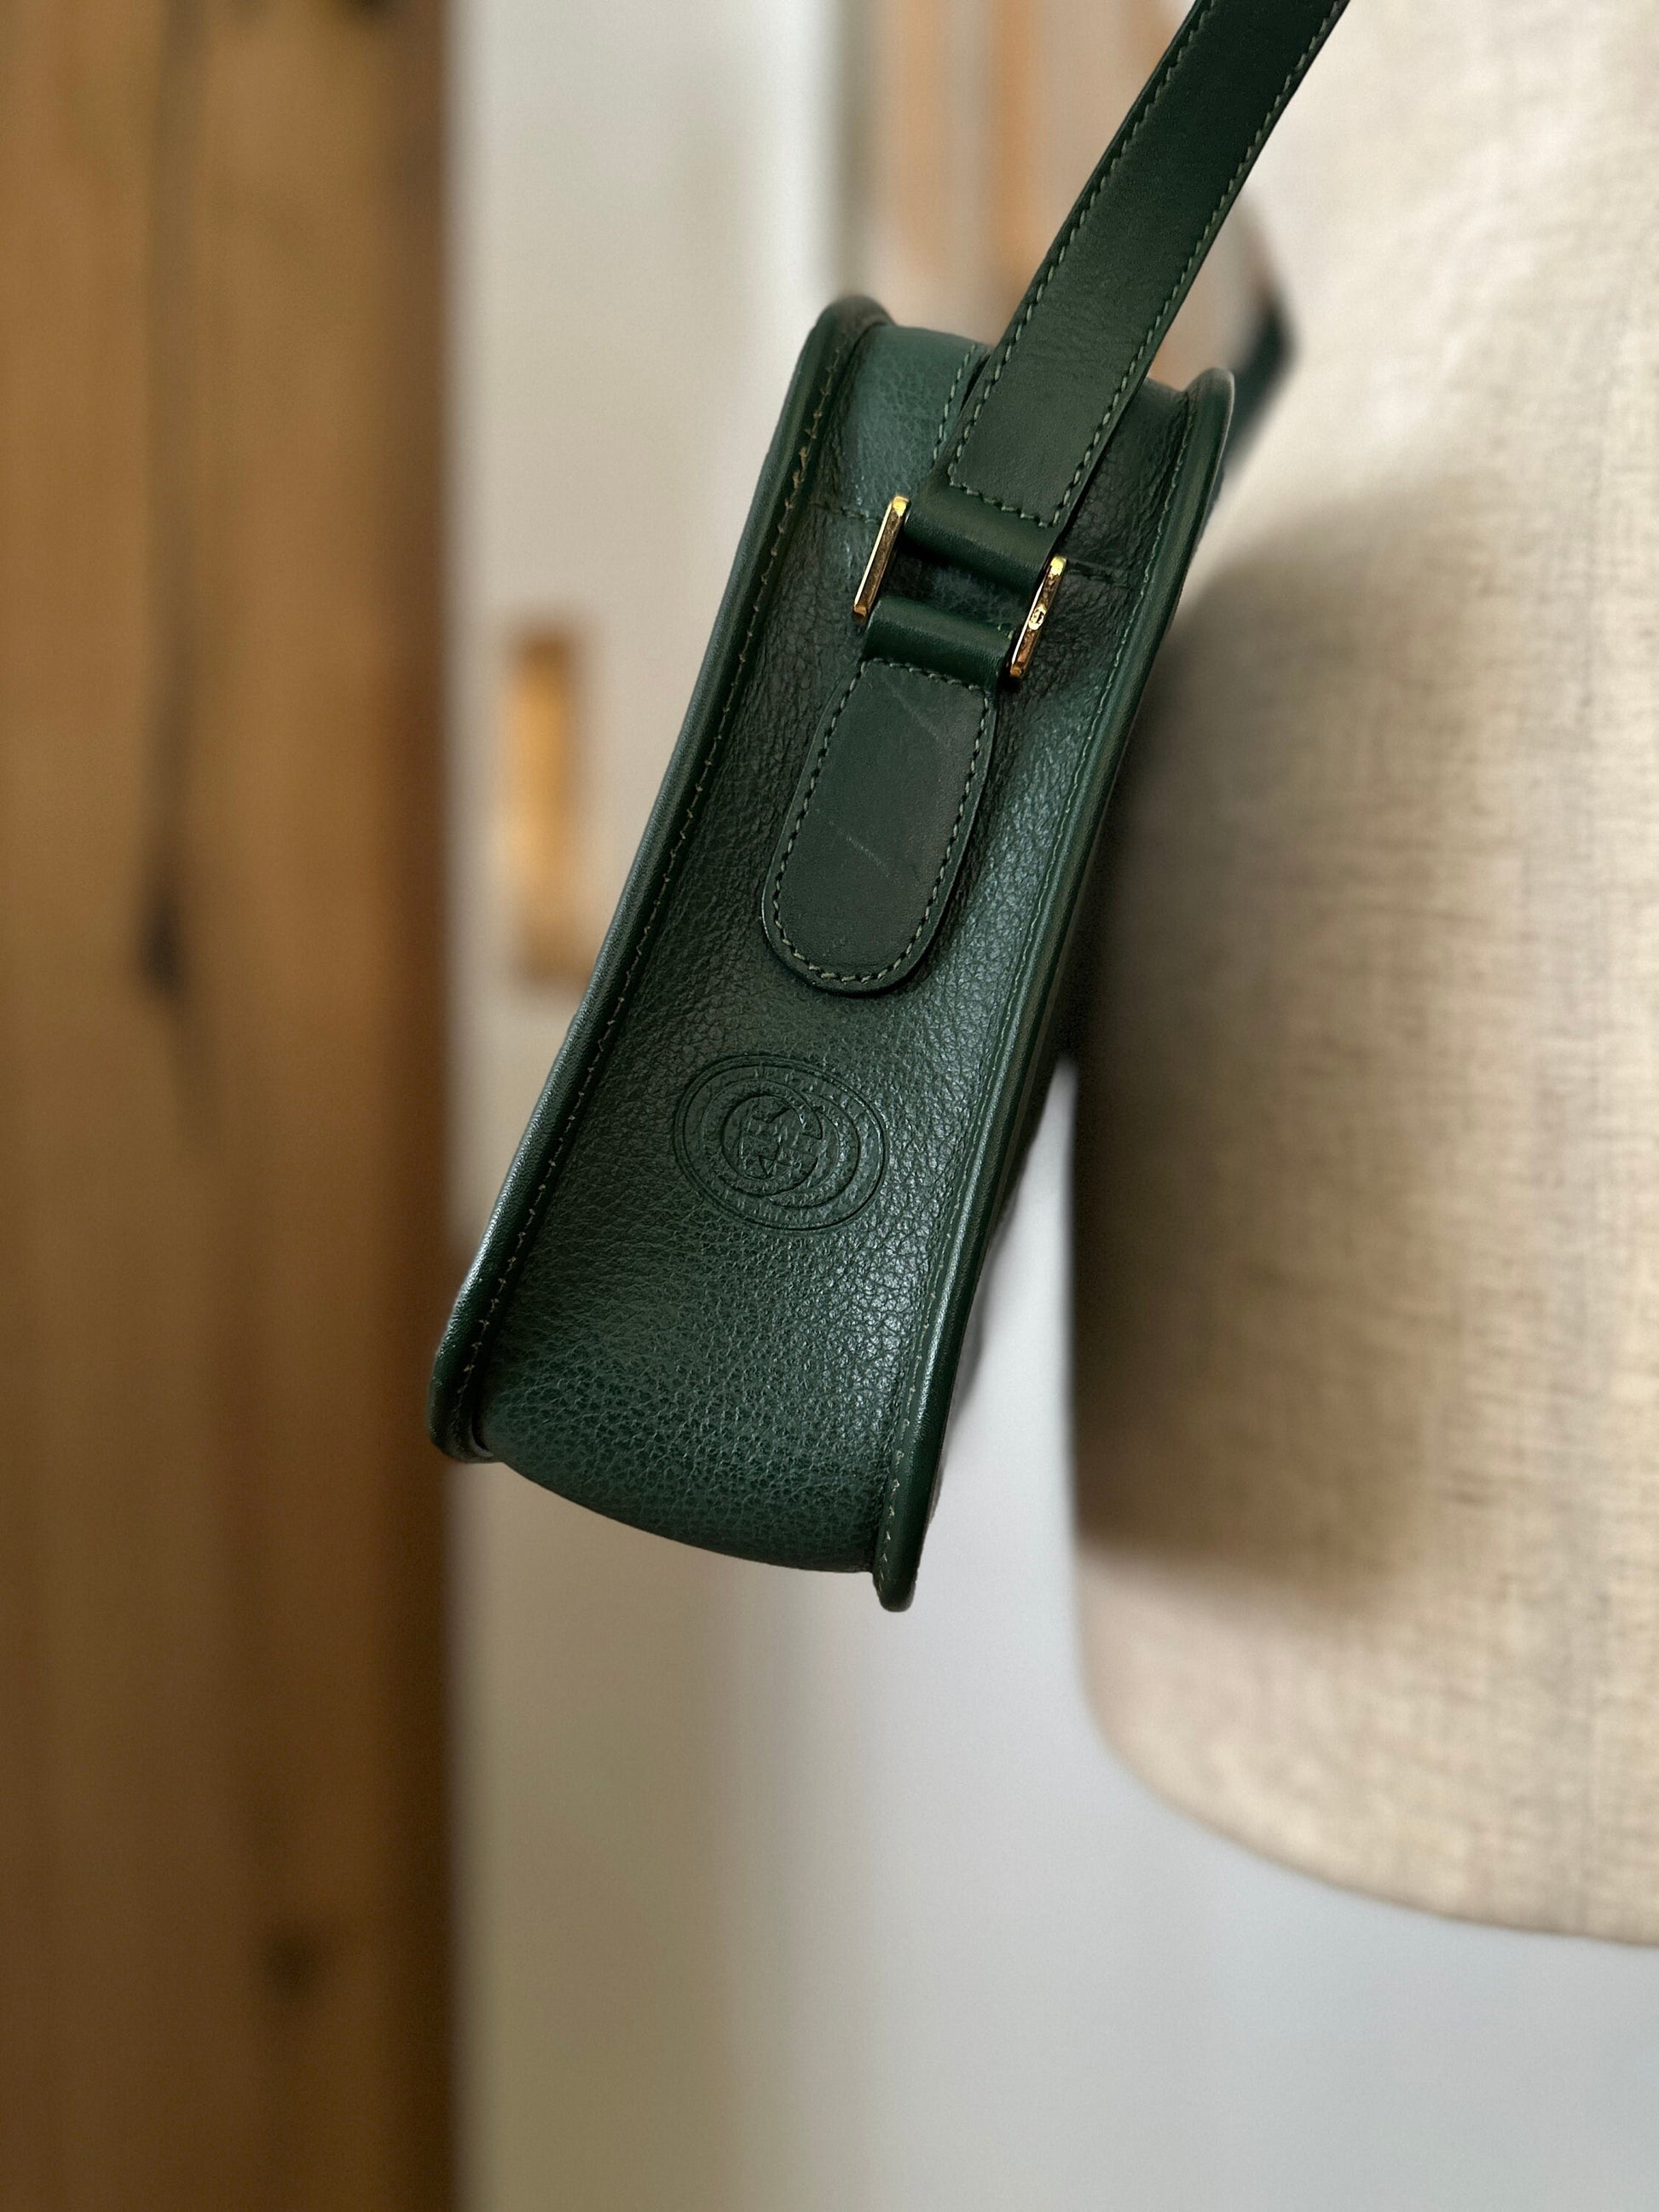 GUCCI VINTAGE 100% Authentic Genuine Leather Cross-body Bag, Dark Moss Green, Late 1980's, Good Condition